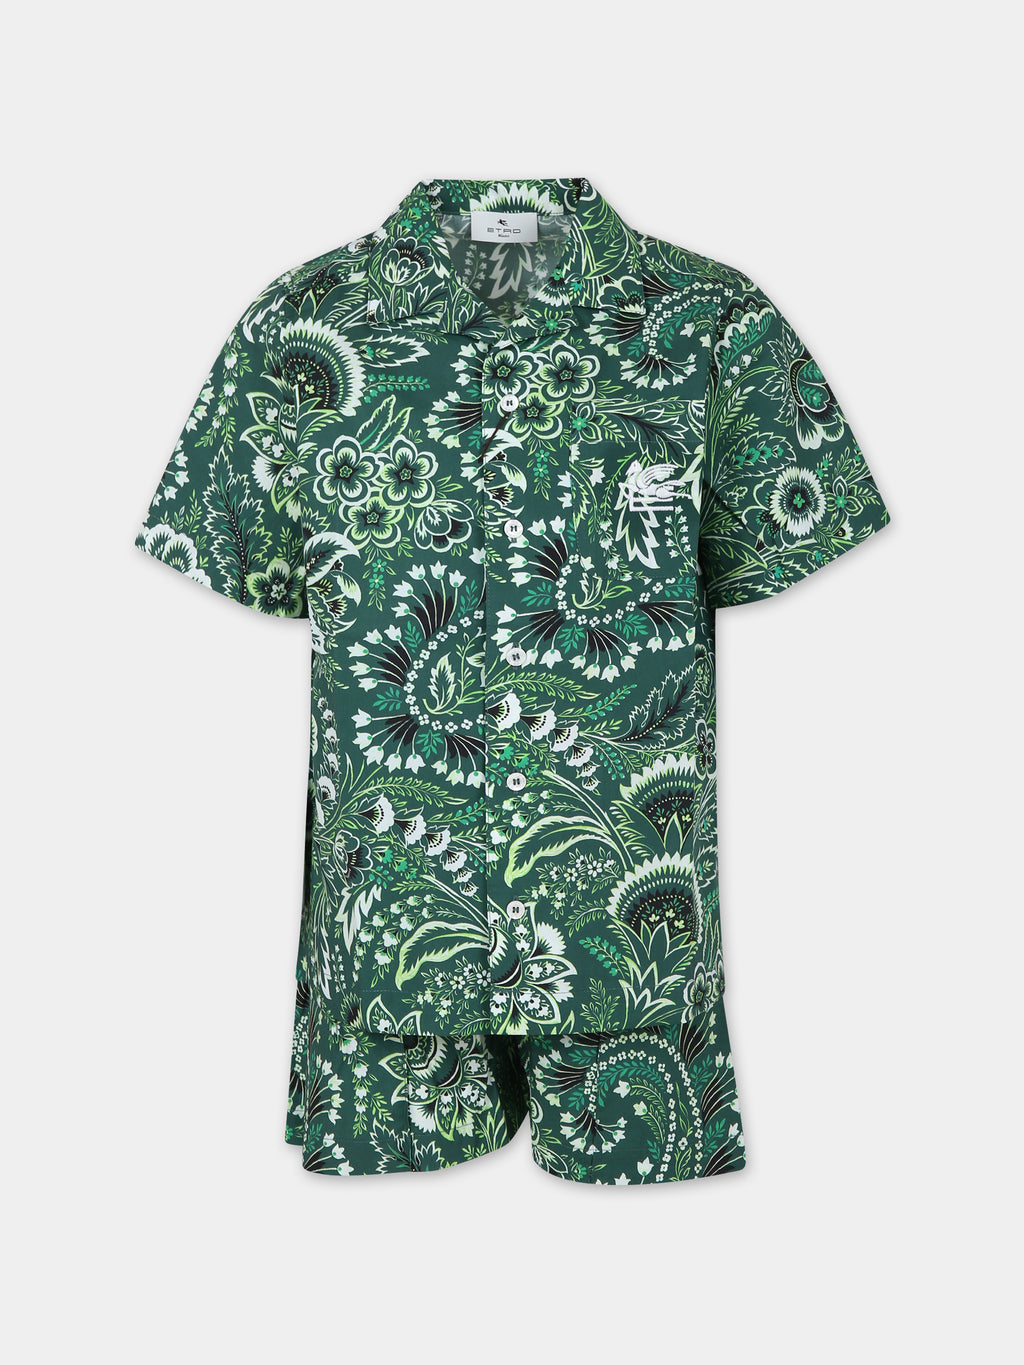 Green suit for boy with paisley pattern